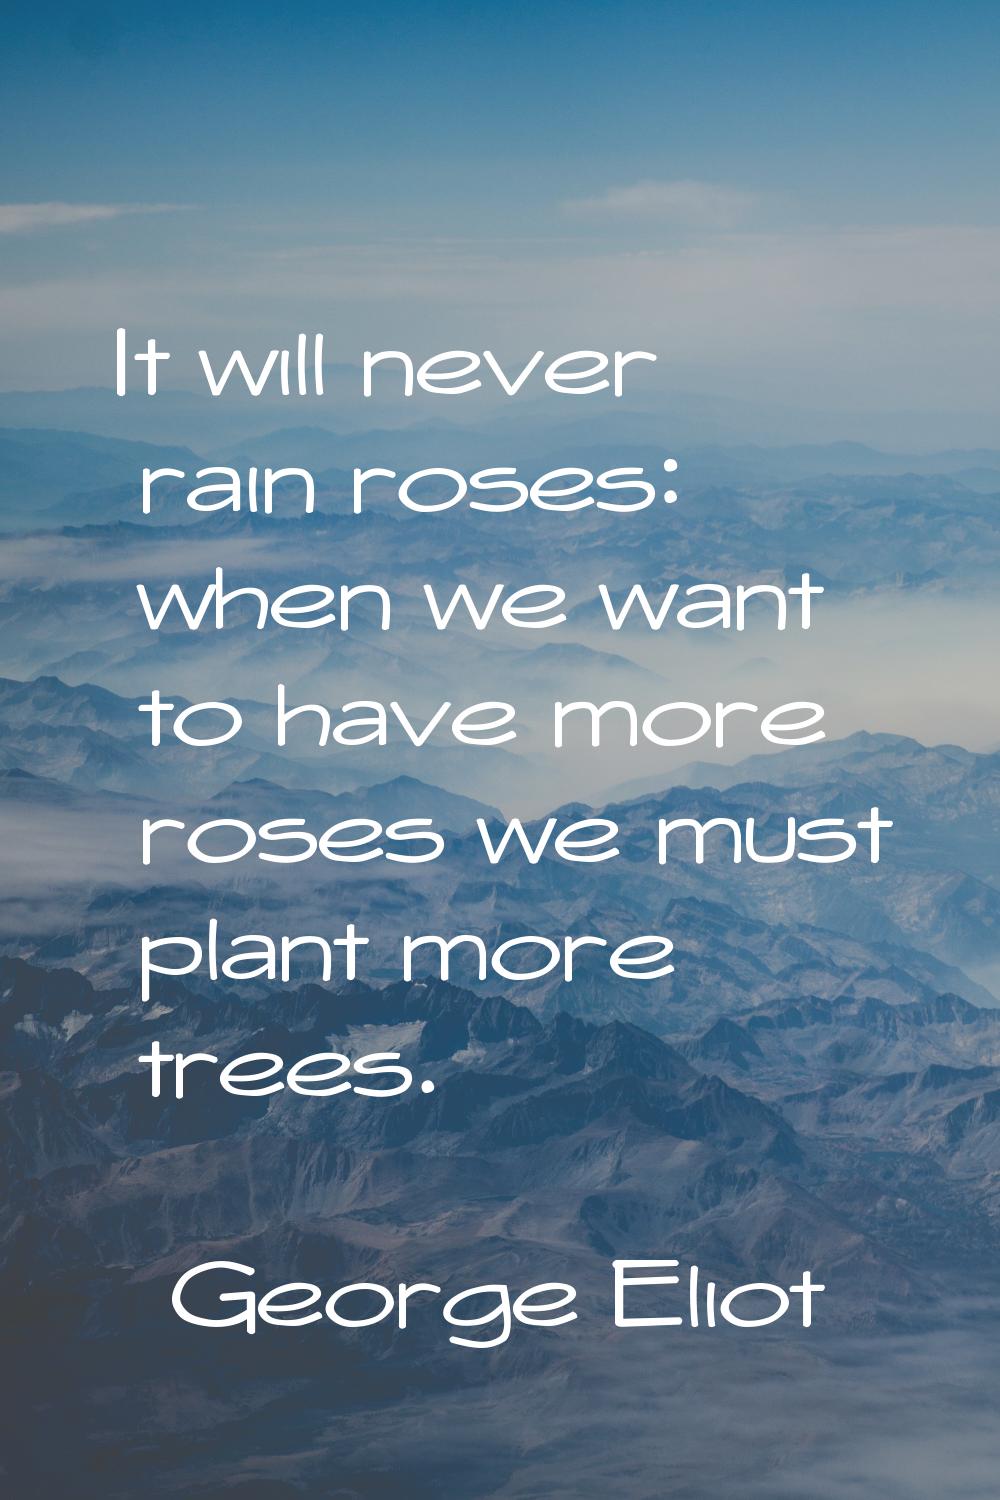 It will never rain roses: when we want to have more roses we must plant more trees.